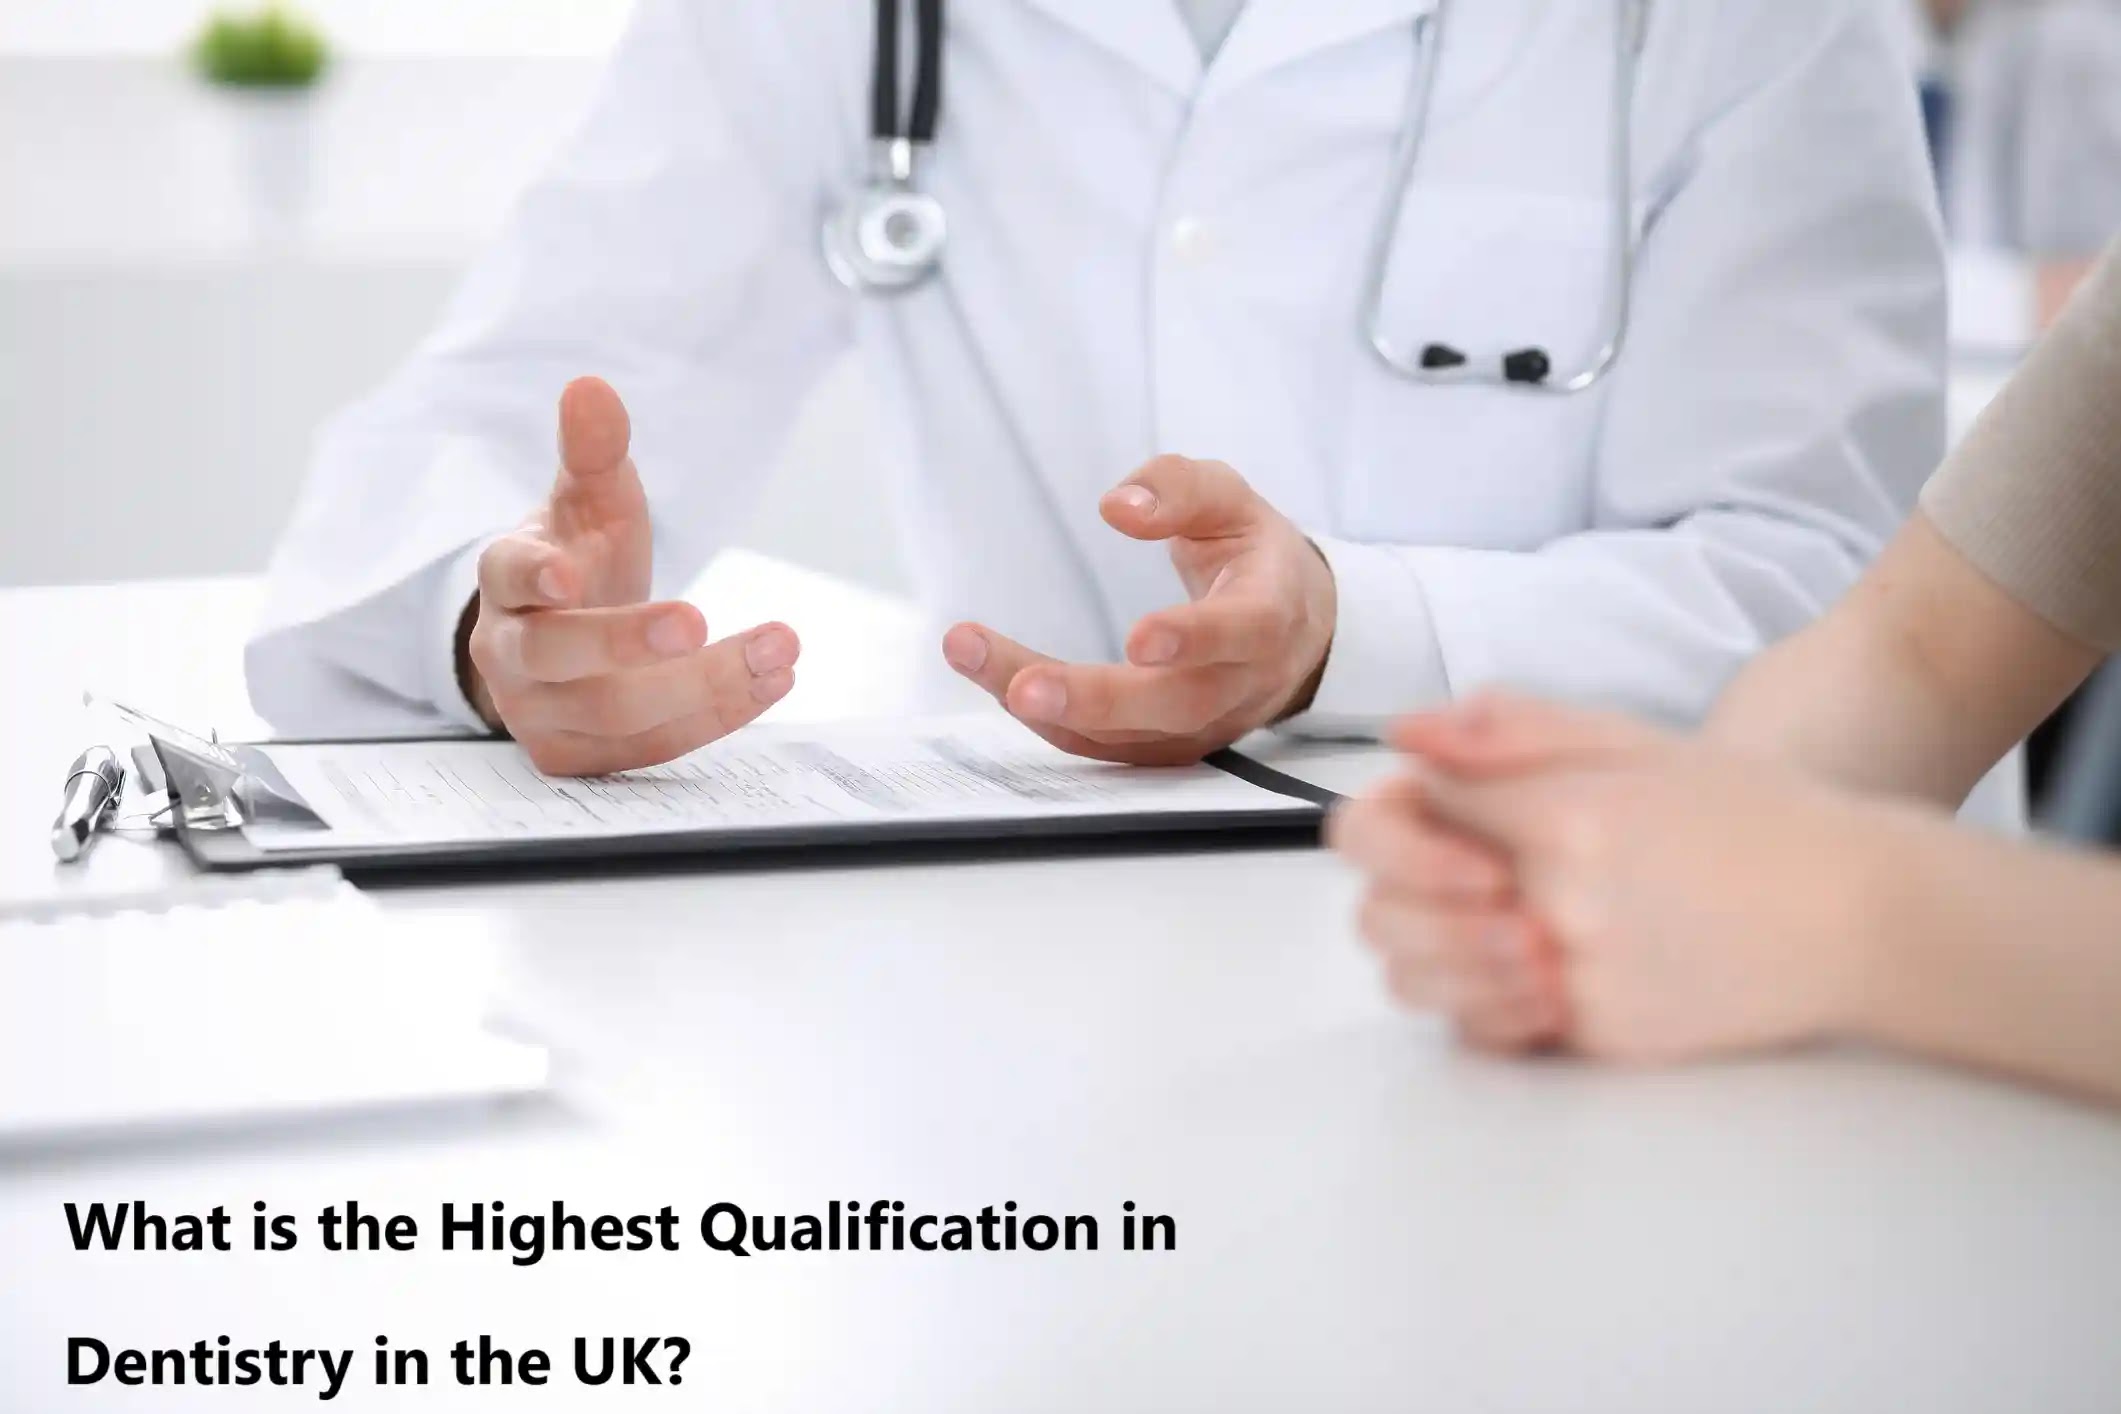 What is the Highest Qualification in Dentistry in the UK?